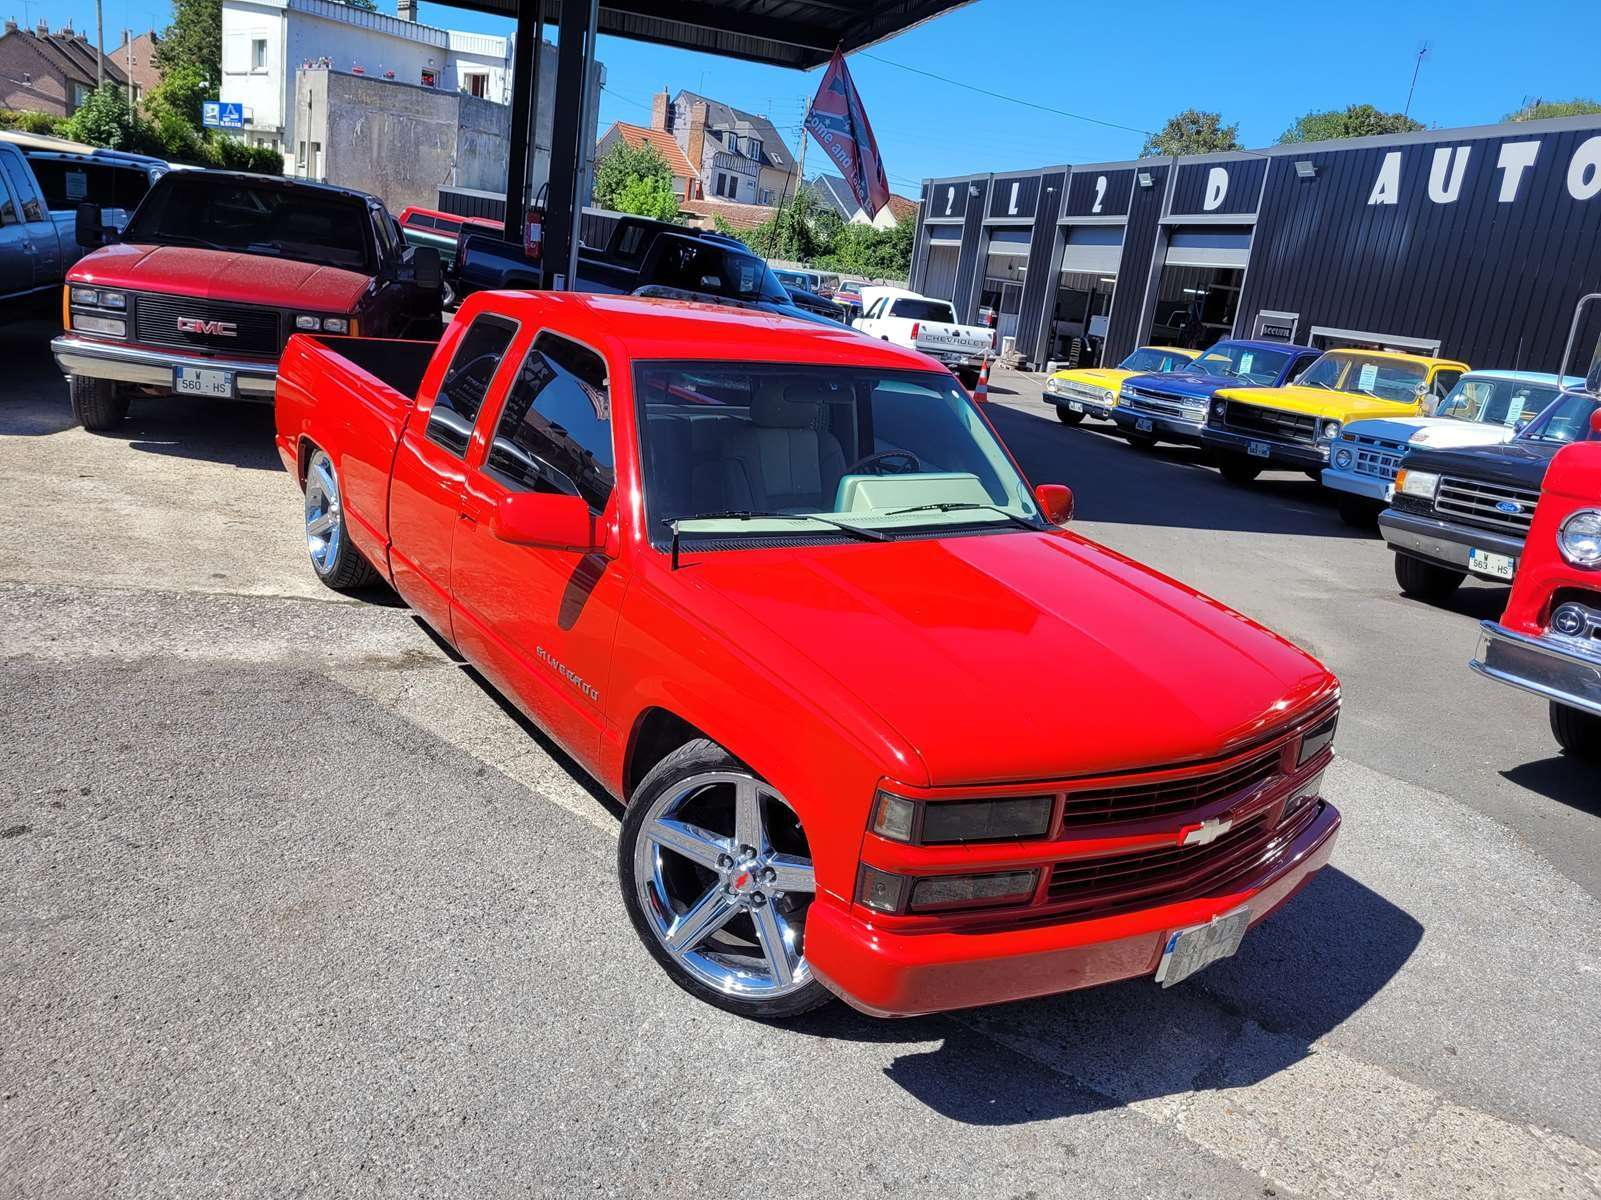 Chevrolet Silverado Off-Road/Pick-up in Red used in Breteuil for € 17,990.-